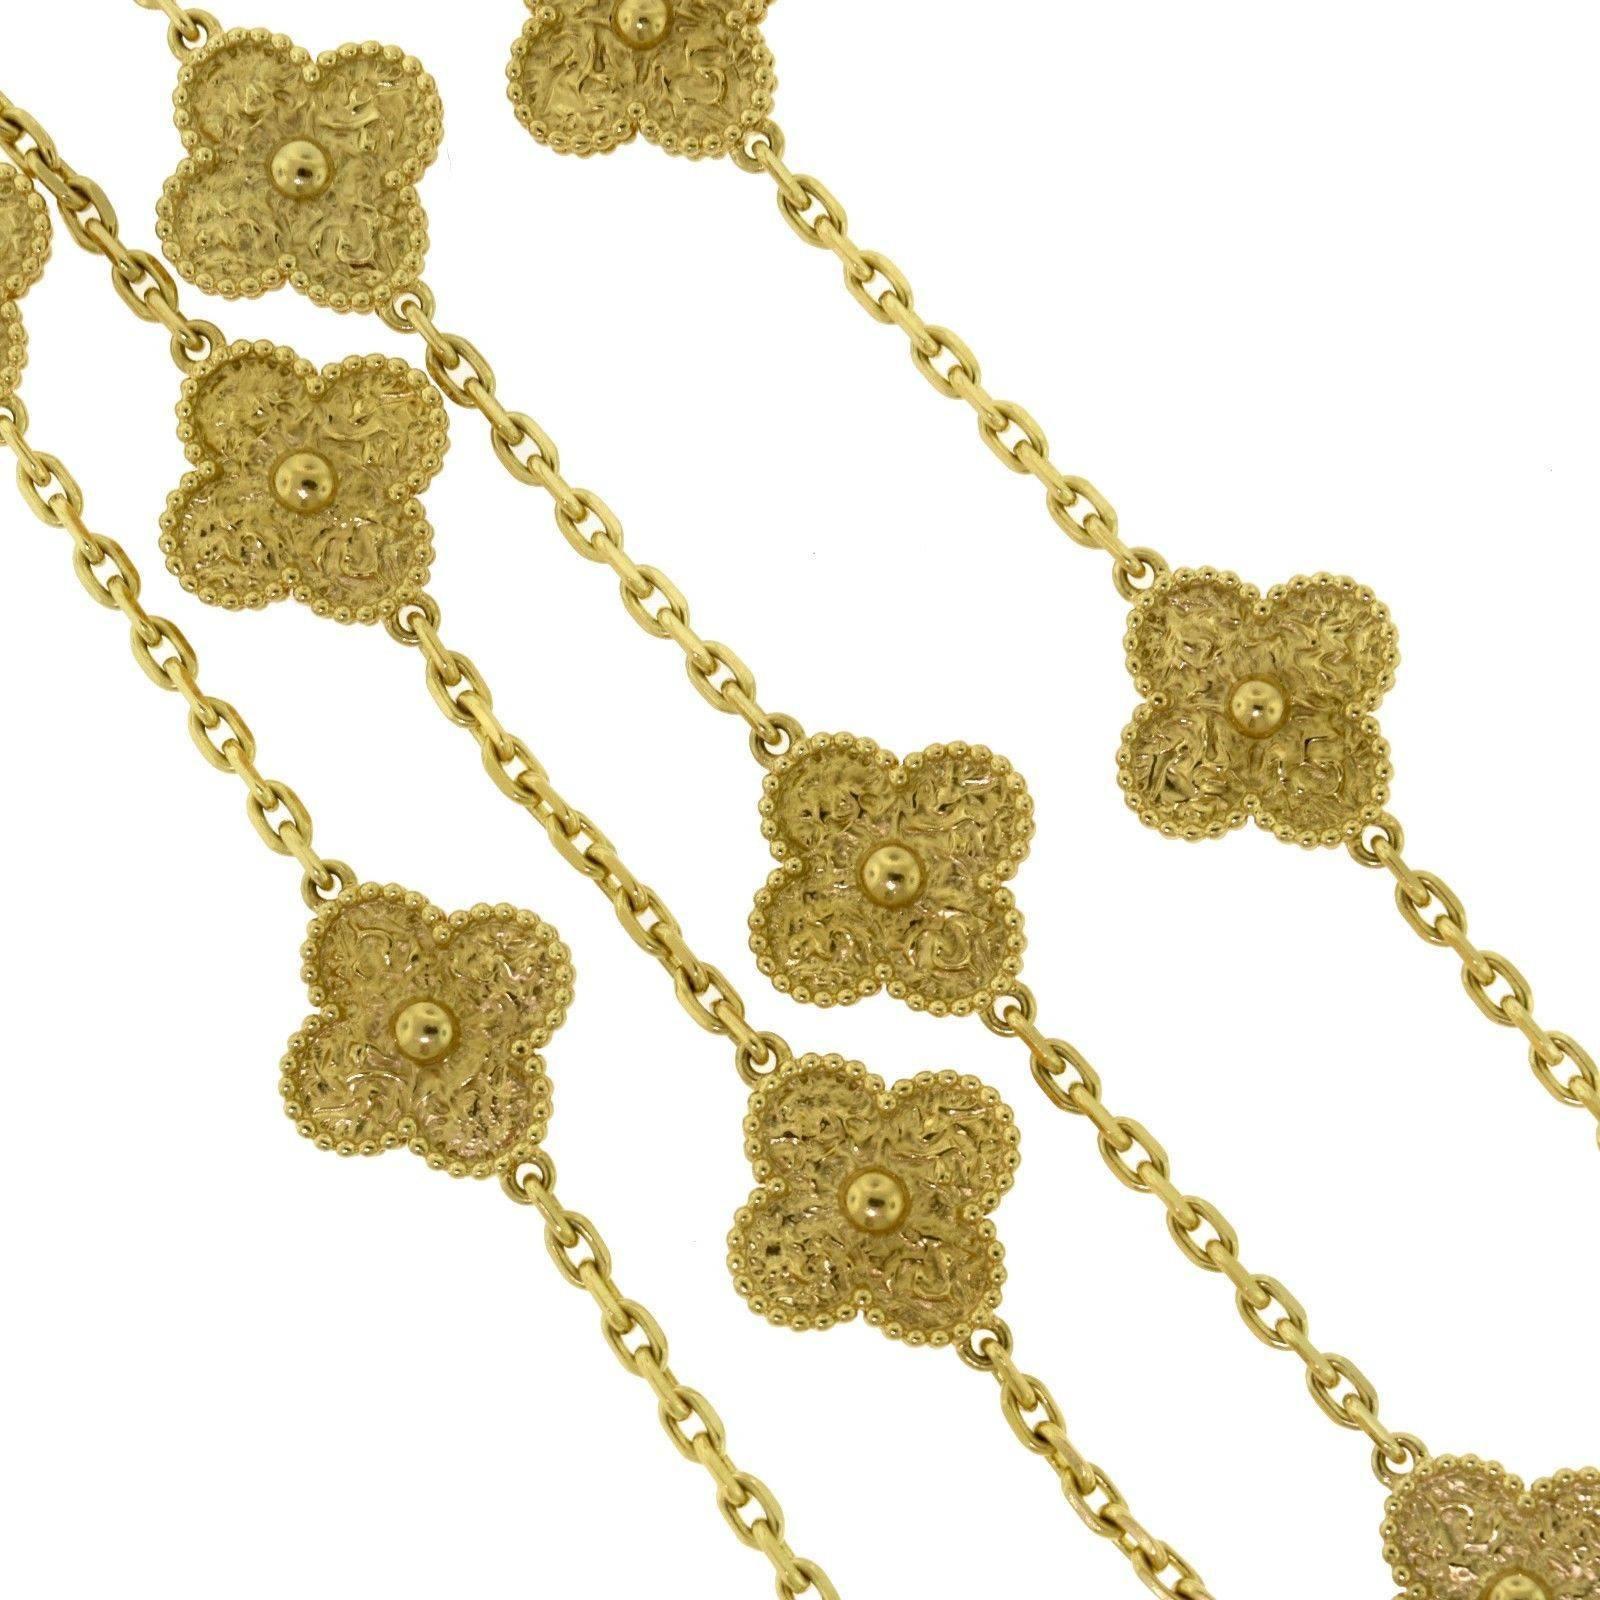 Designer: Van Cleef & Arpels
Collection: Vintage Alhambra
Style: 20 Motif Long Necklace 
Metal: 18k Yellow Gold
Total Item Weight (g): 57.1
Chain Length: 33.6 inches
Motif DImensions: 12.68 x 14.45 mm
Signature: VCA 
Hallmark: G750 Serial